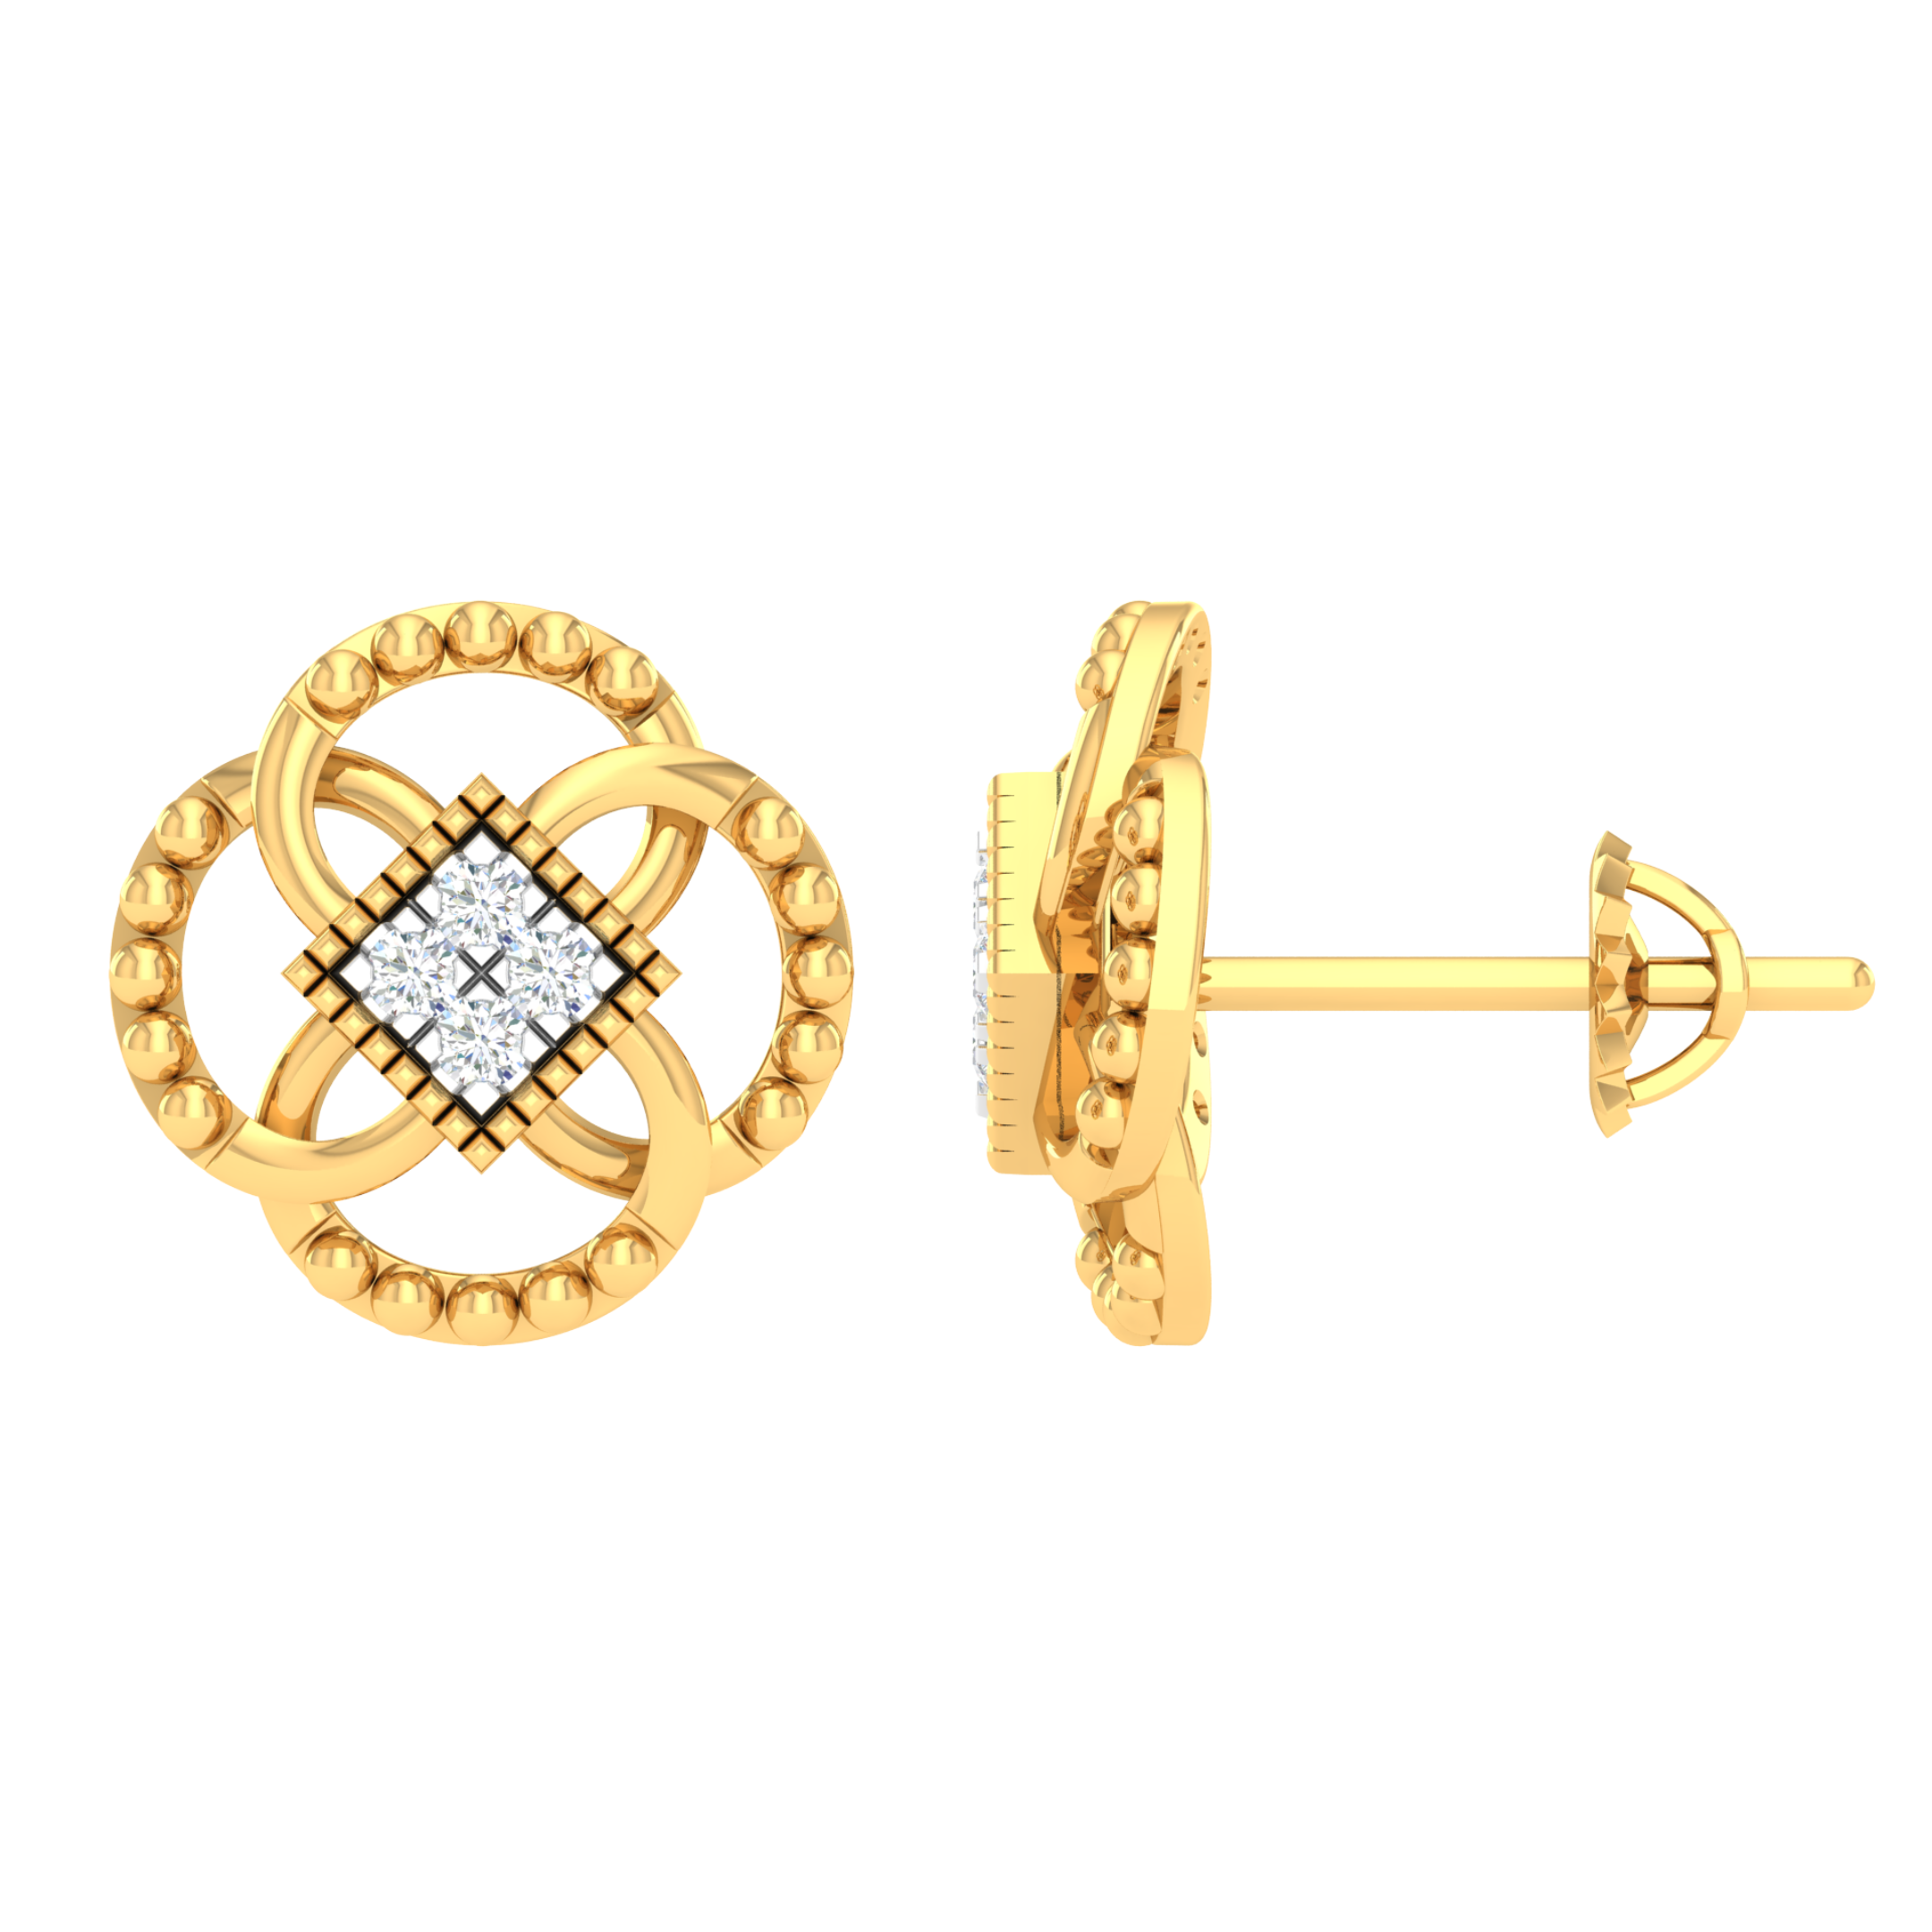 18KT YELLOW GOLD AMIRM REAL DIAMOND EARRINGS